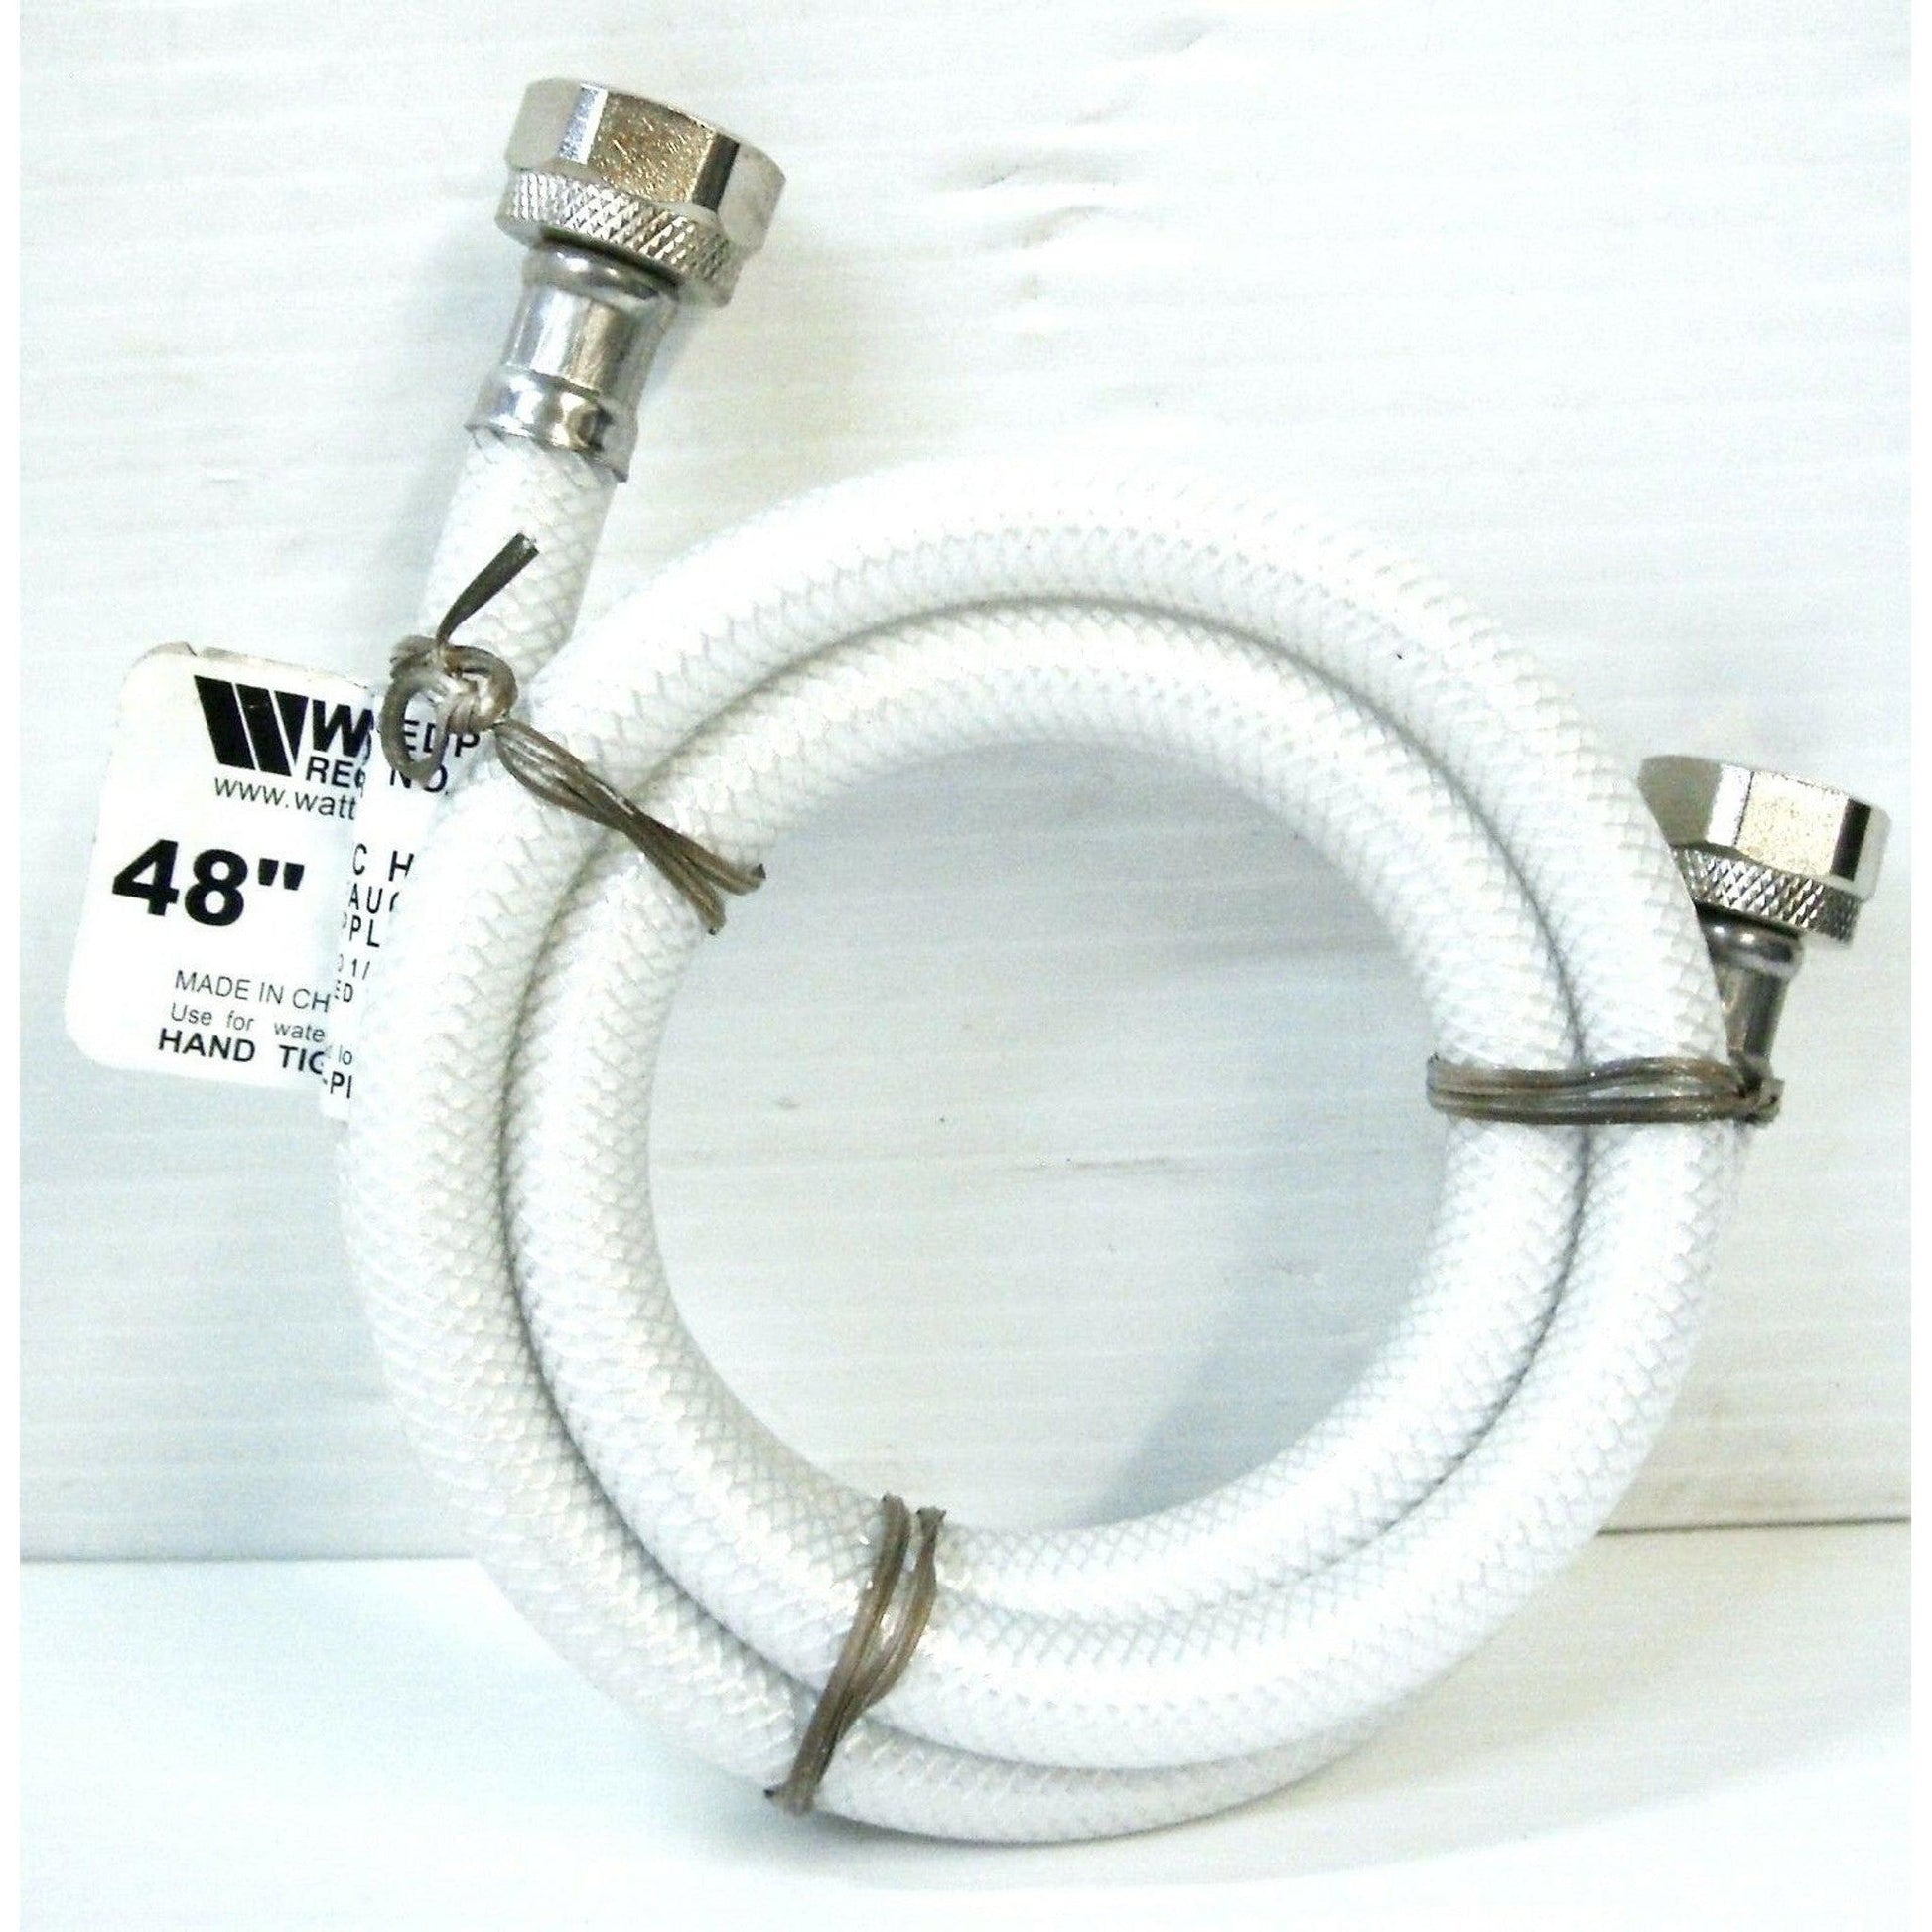 Throne Buttler 48" Bidet Adapter Hose With 1" IPS Fitting